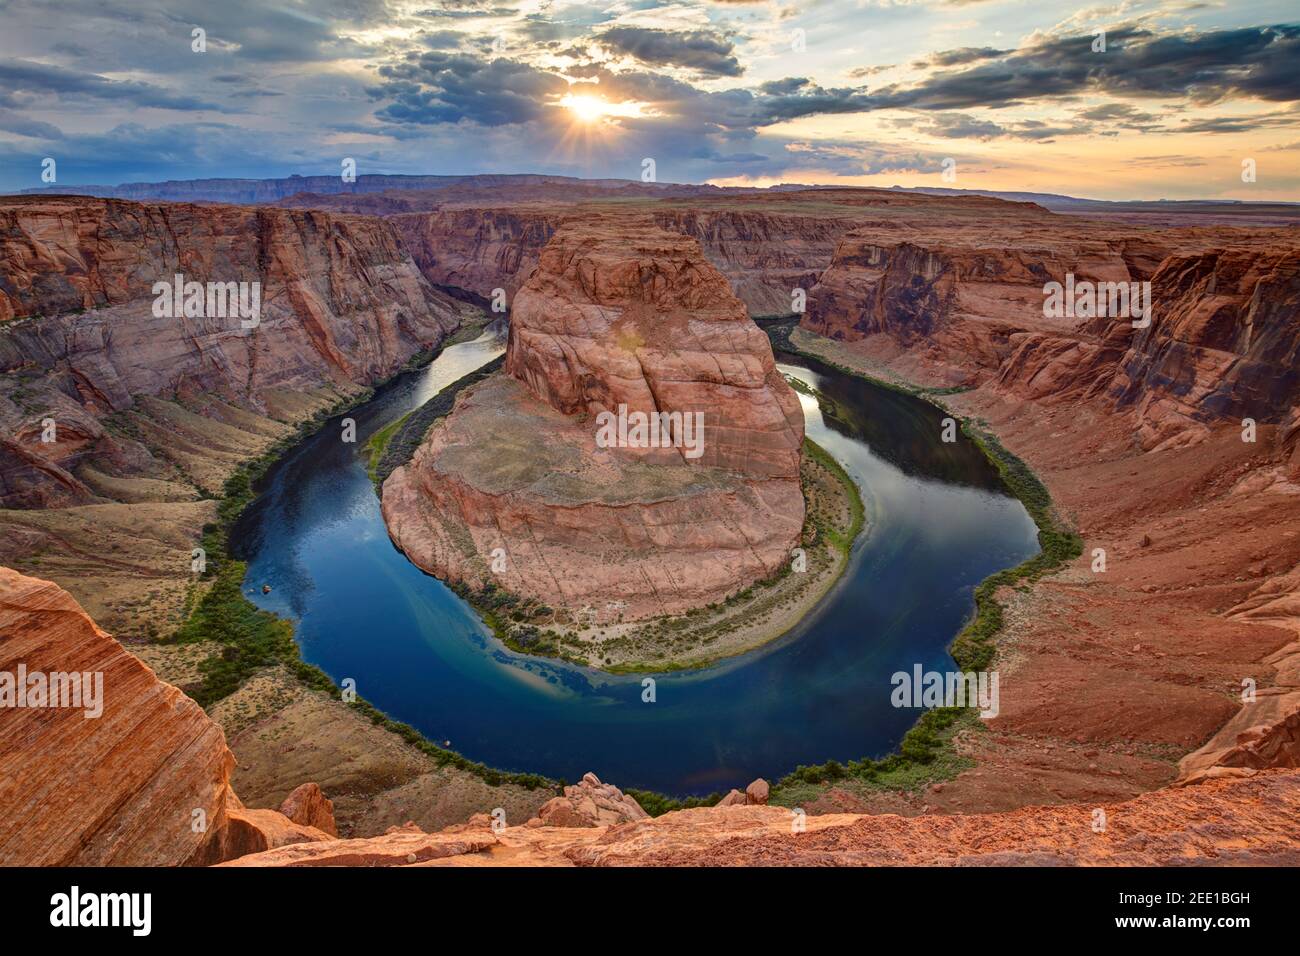 Horseshoe bend seen from the lookout point, Arizona, United States ...